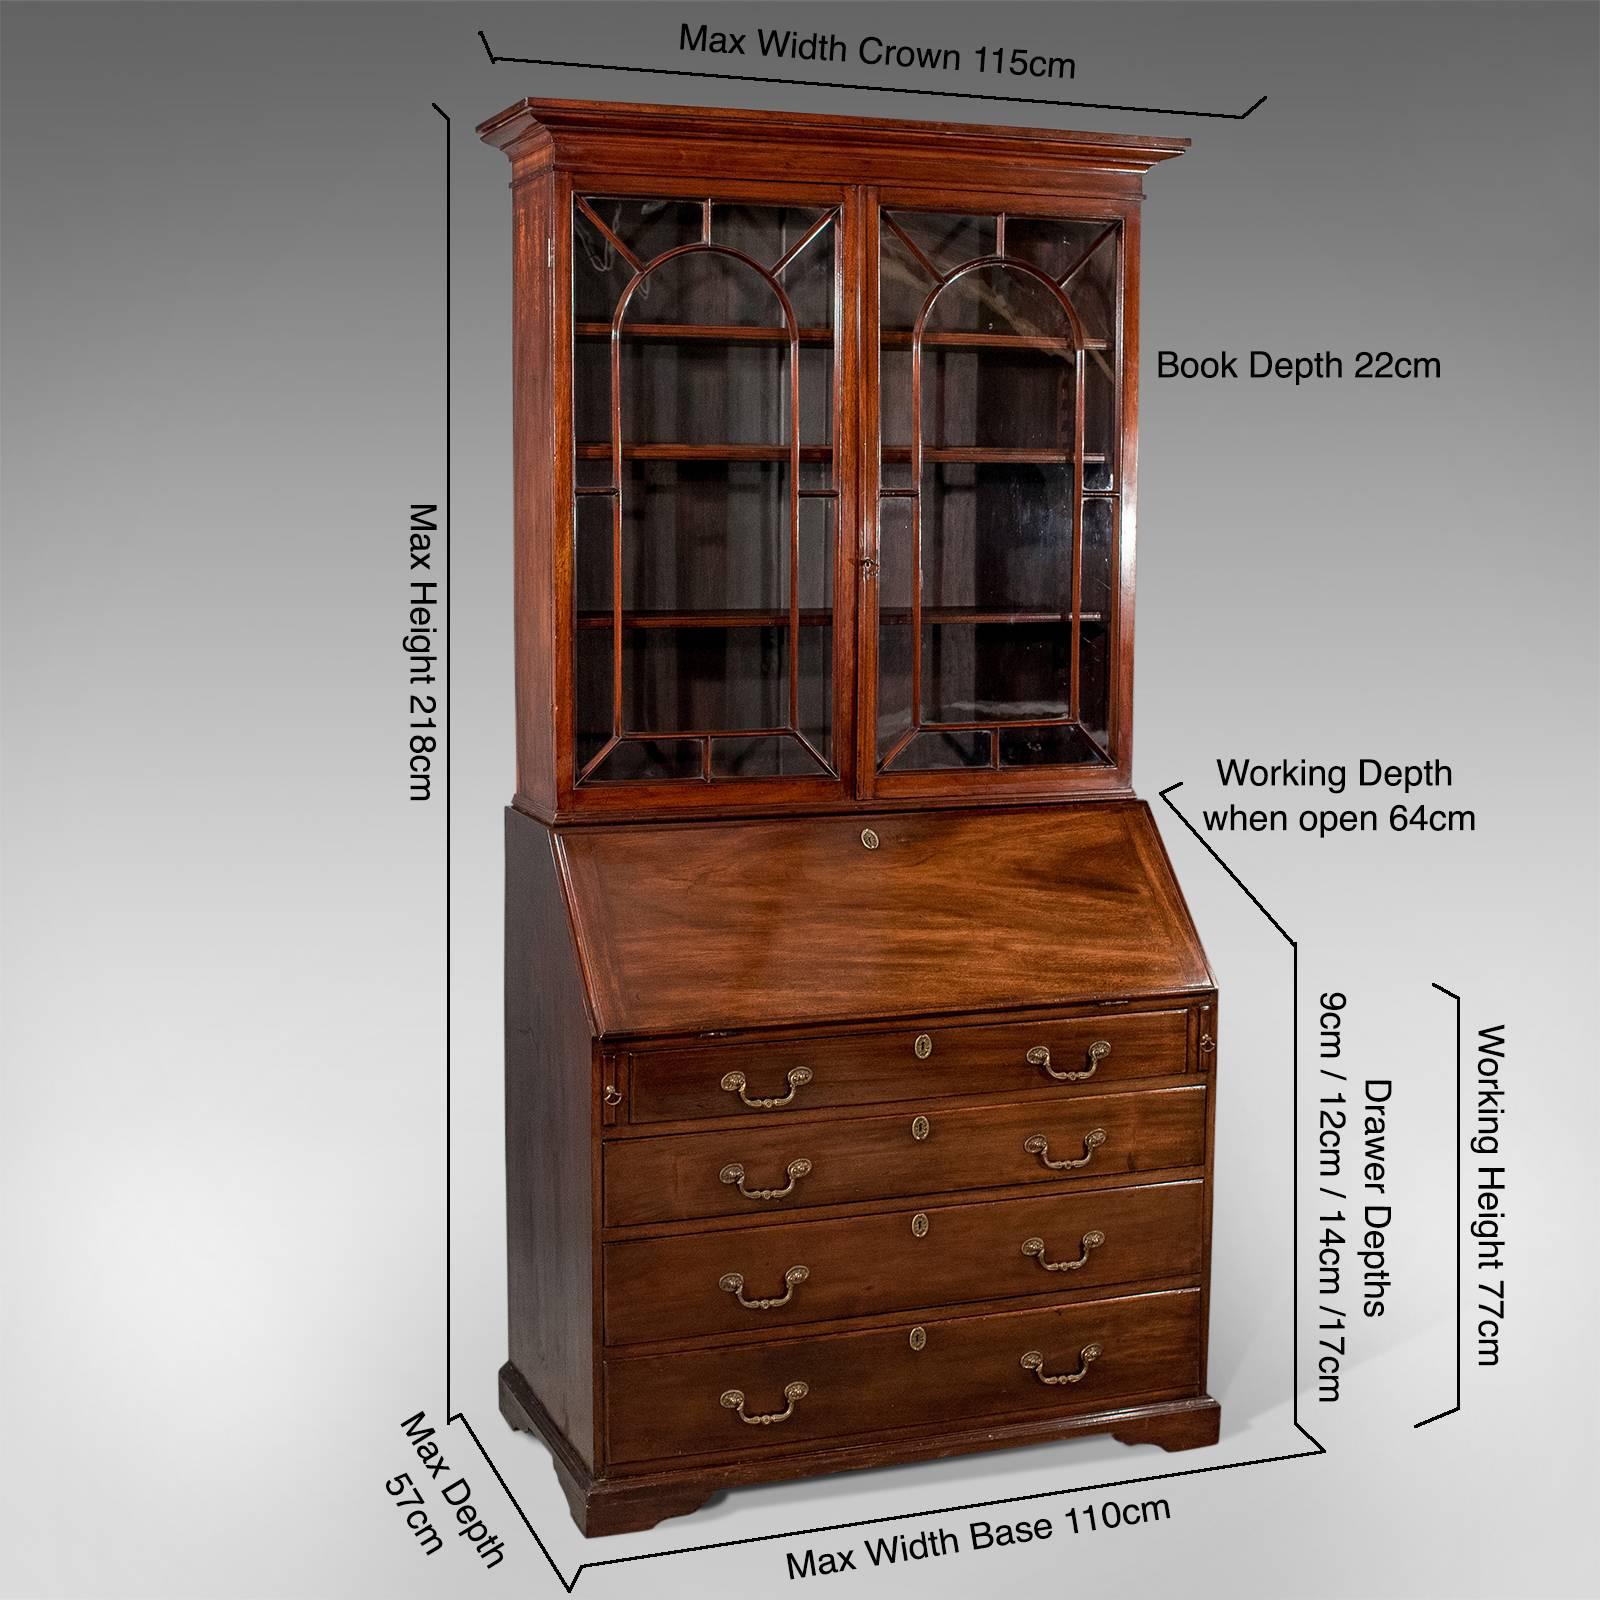 A most pleasing tall bureau bookcase presented in good antique condition, circa 1800
Original English Georgian from the late 18th century
With classic glazed display cabinet over a practical writing bureau
Generous in size offering practical